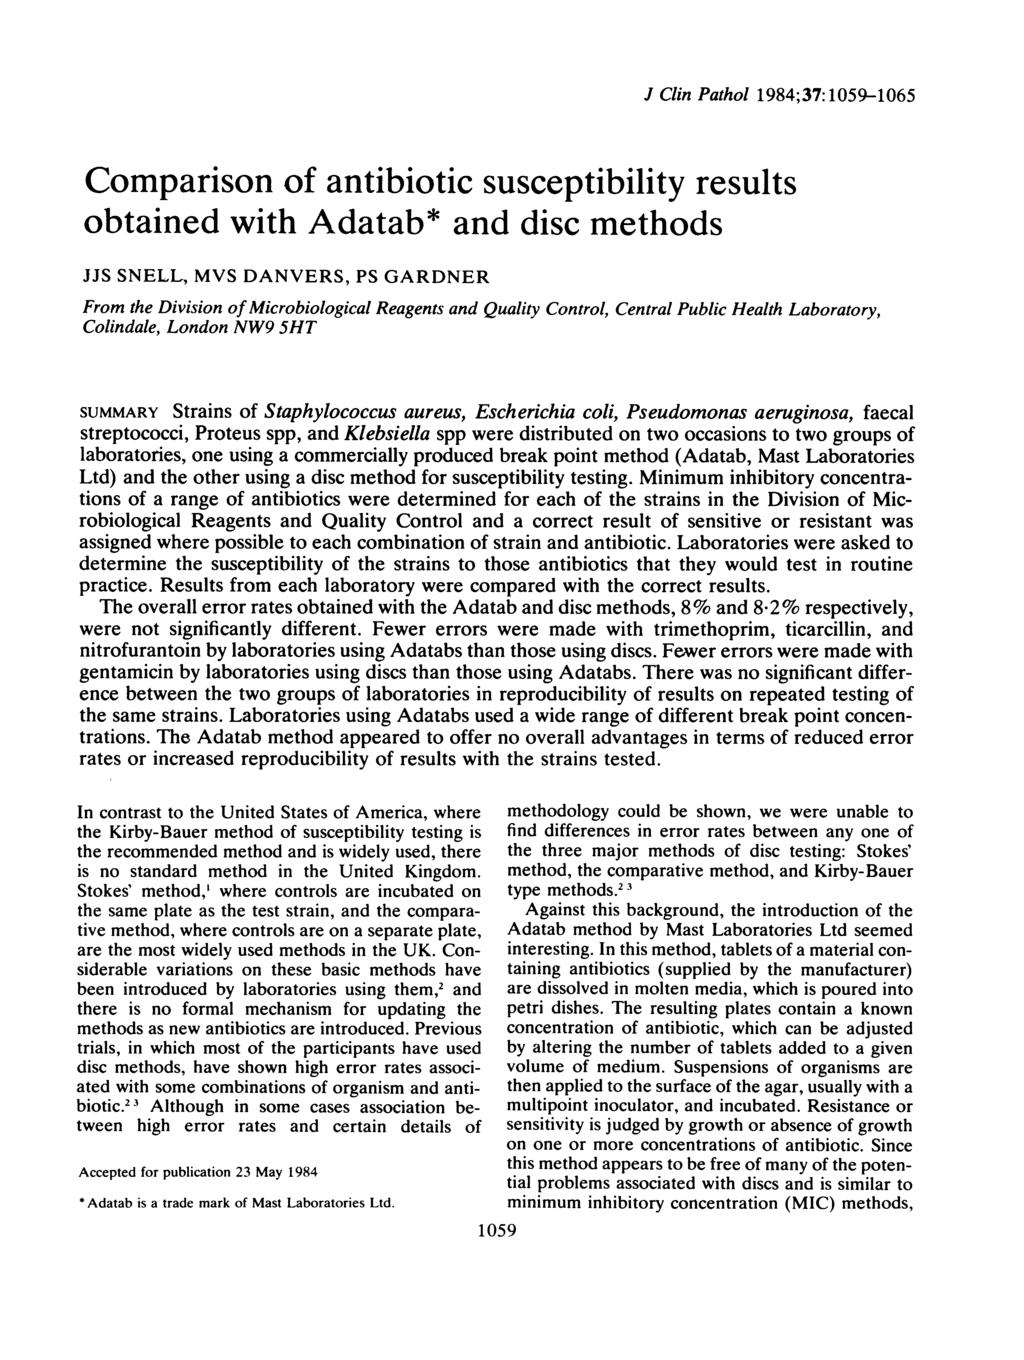 J Clin Pathol 1984;37:159-165 Comparison of antibiotic susceptibility results obtained with Adatab* and disc methods JJS SNELL, MVS DANVERS, PS GARDNER From the Division of Microbiological Reagents